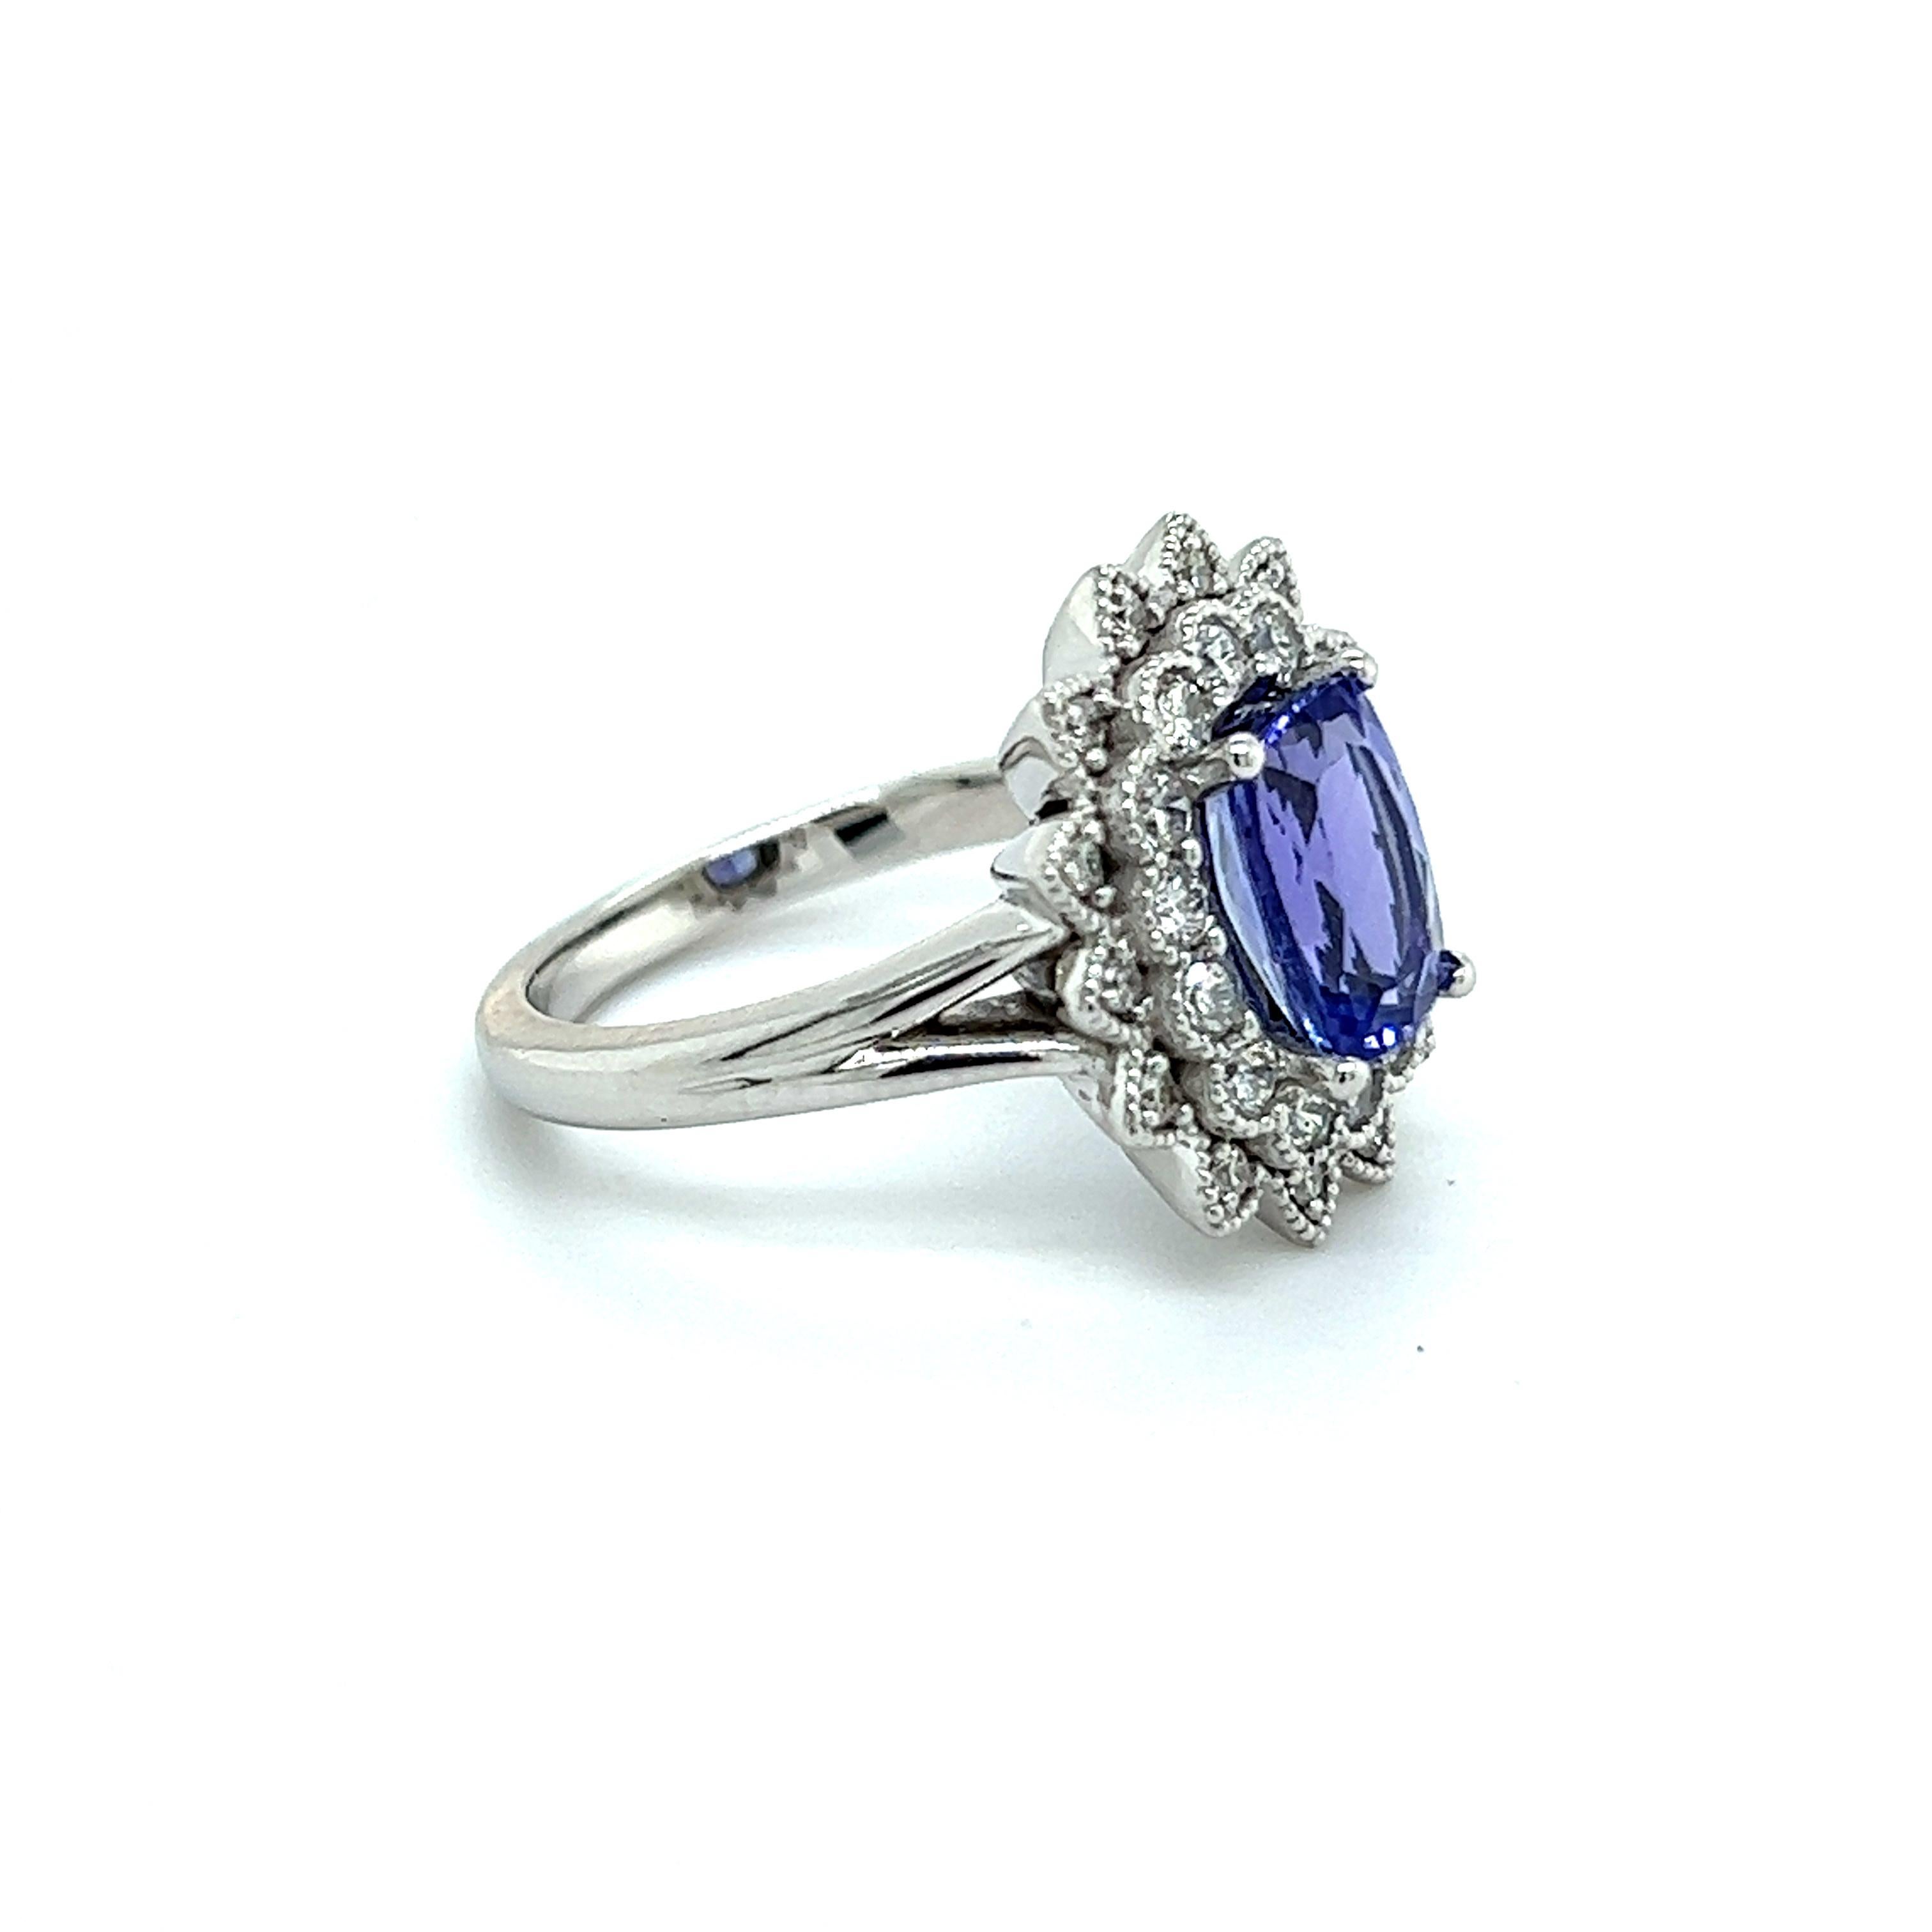 Natural Tanzanite Diamond Ring 6.5 14k W Gold 2.61 TCW Certified For Sale 3